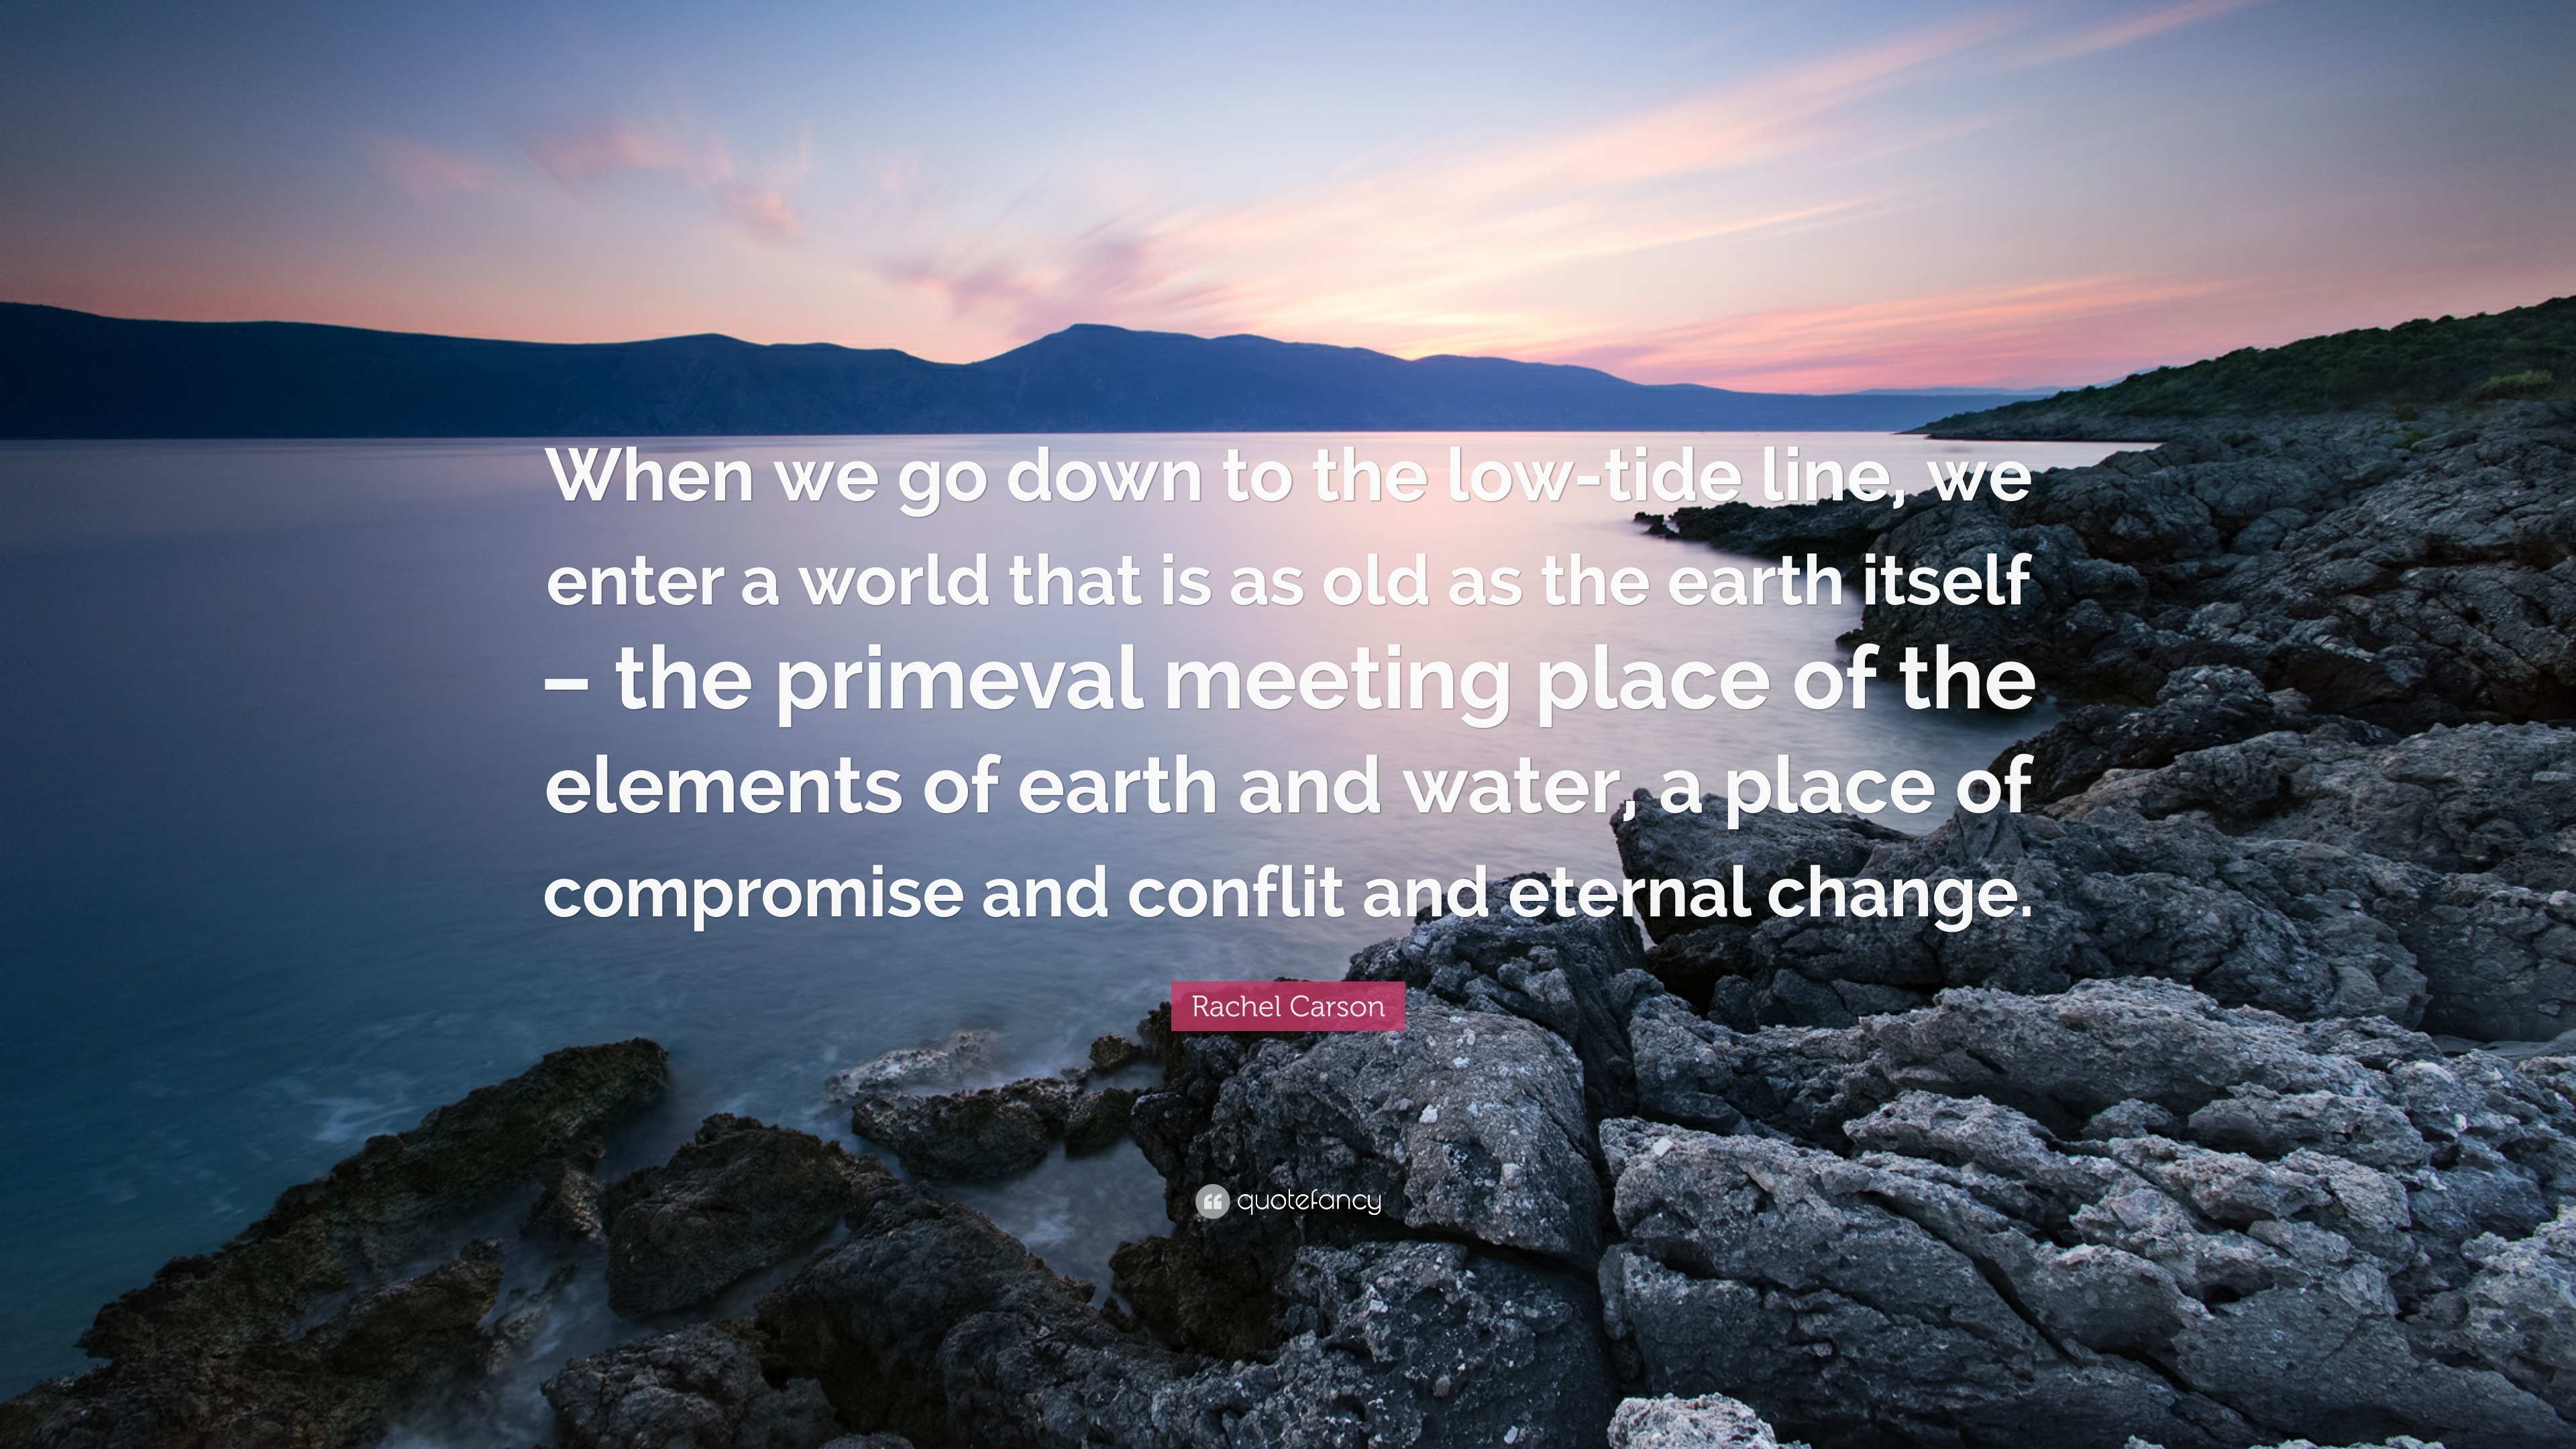 rachel-carson-quote-when-we-go-down-to-the-low-tide-line-we-enter-a